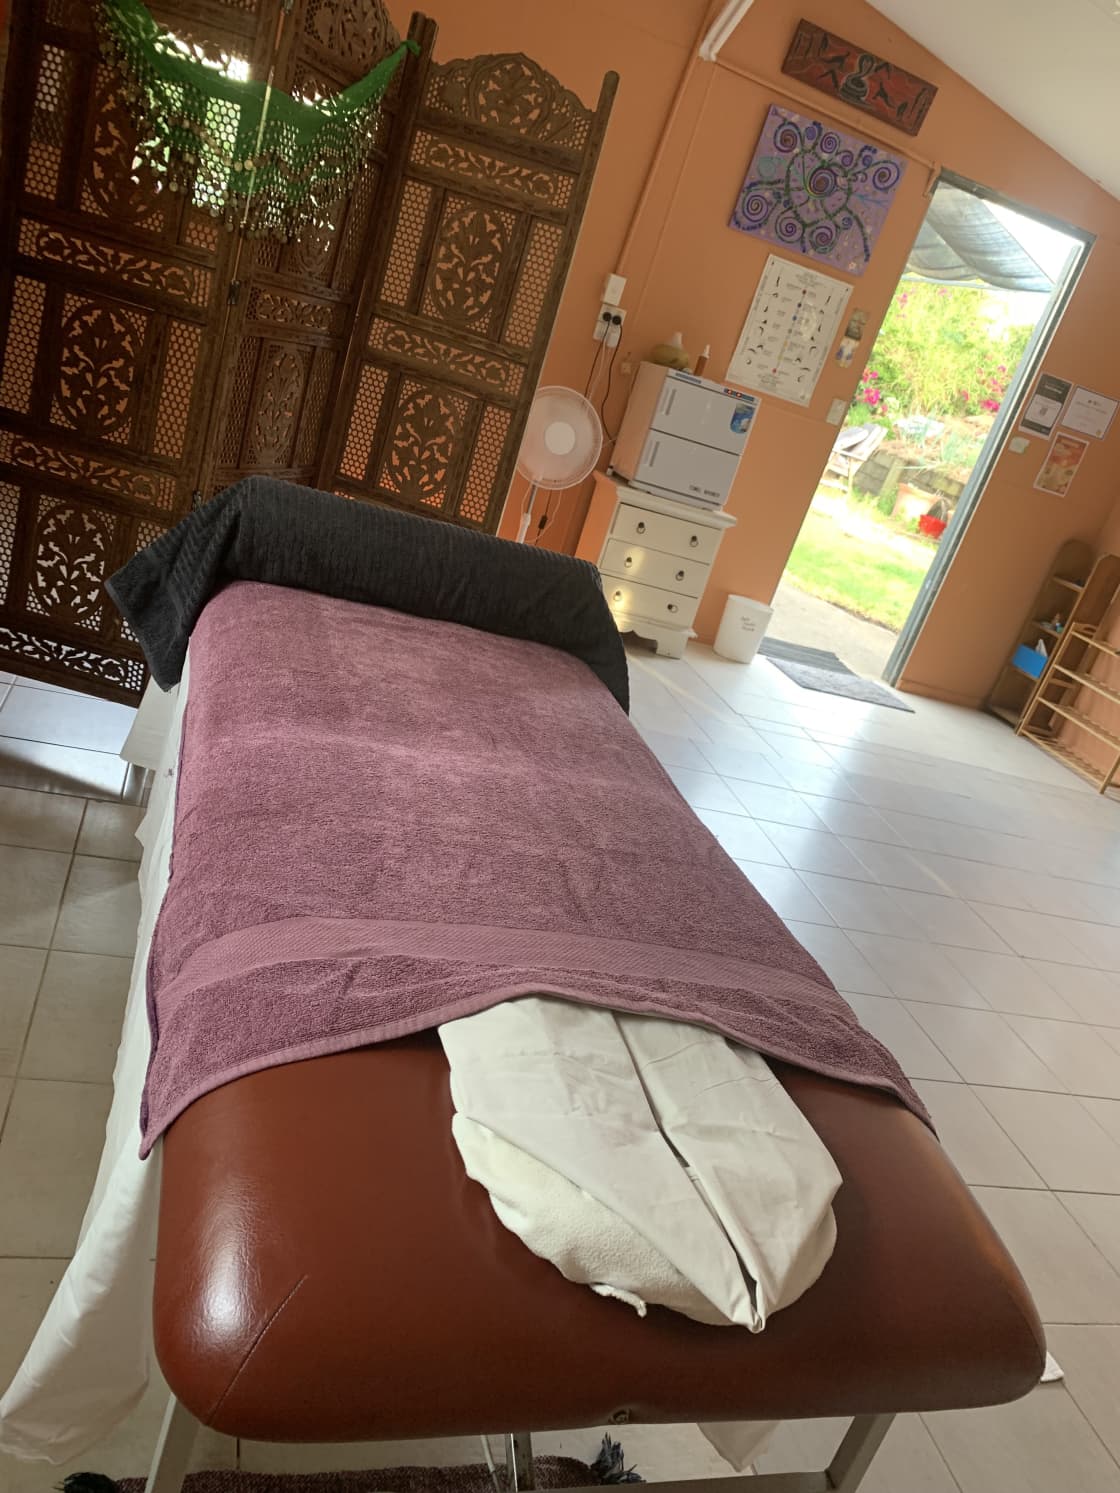 Aromatherapy oils, hot towels and stretching techniques are used to ease aches and pains and help you feel relaxed and renewed.